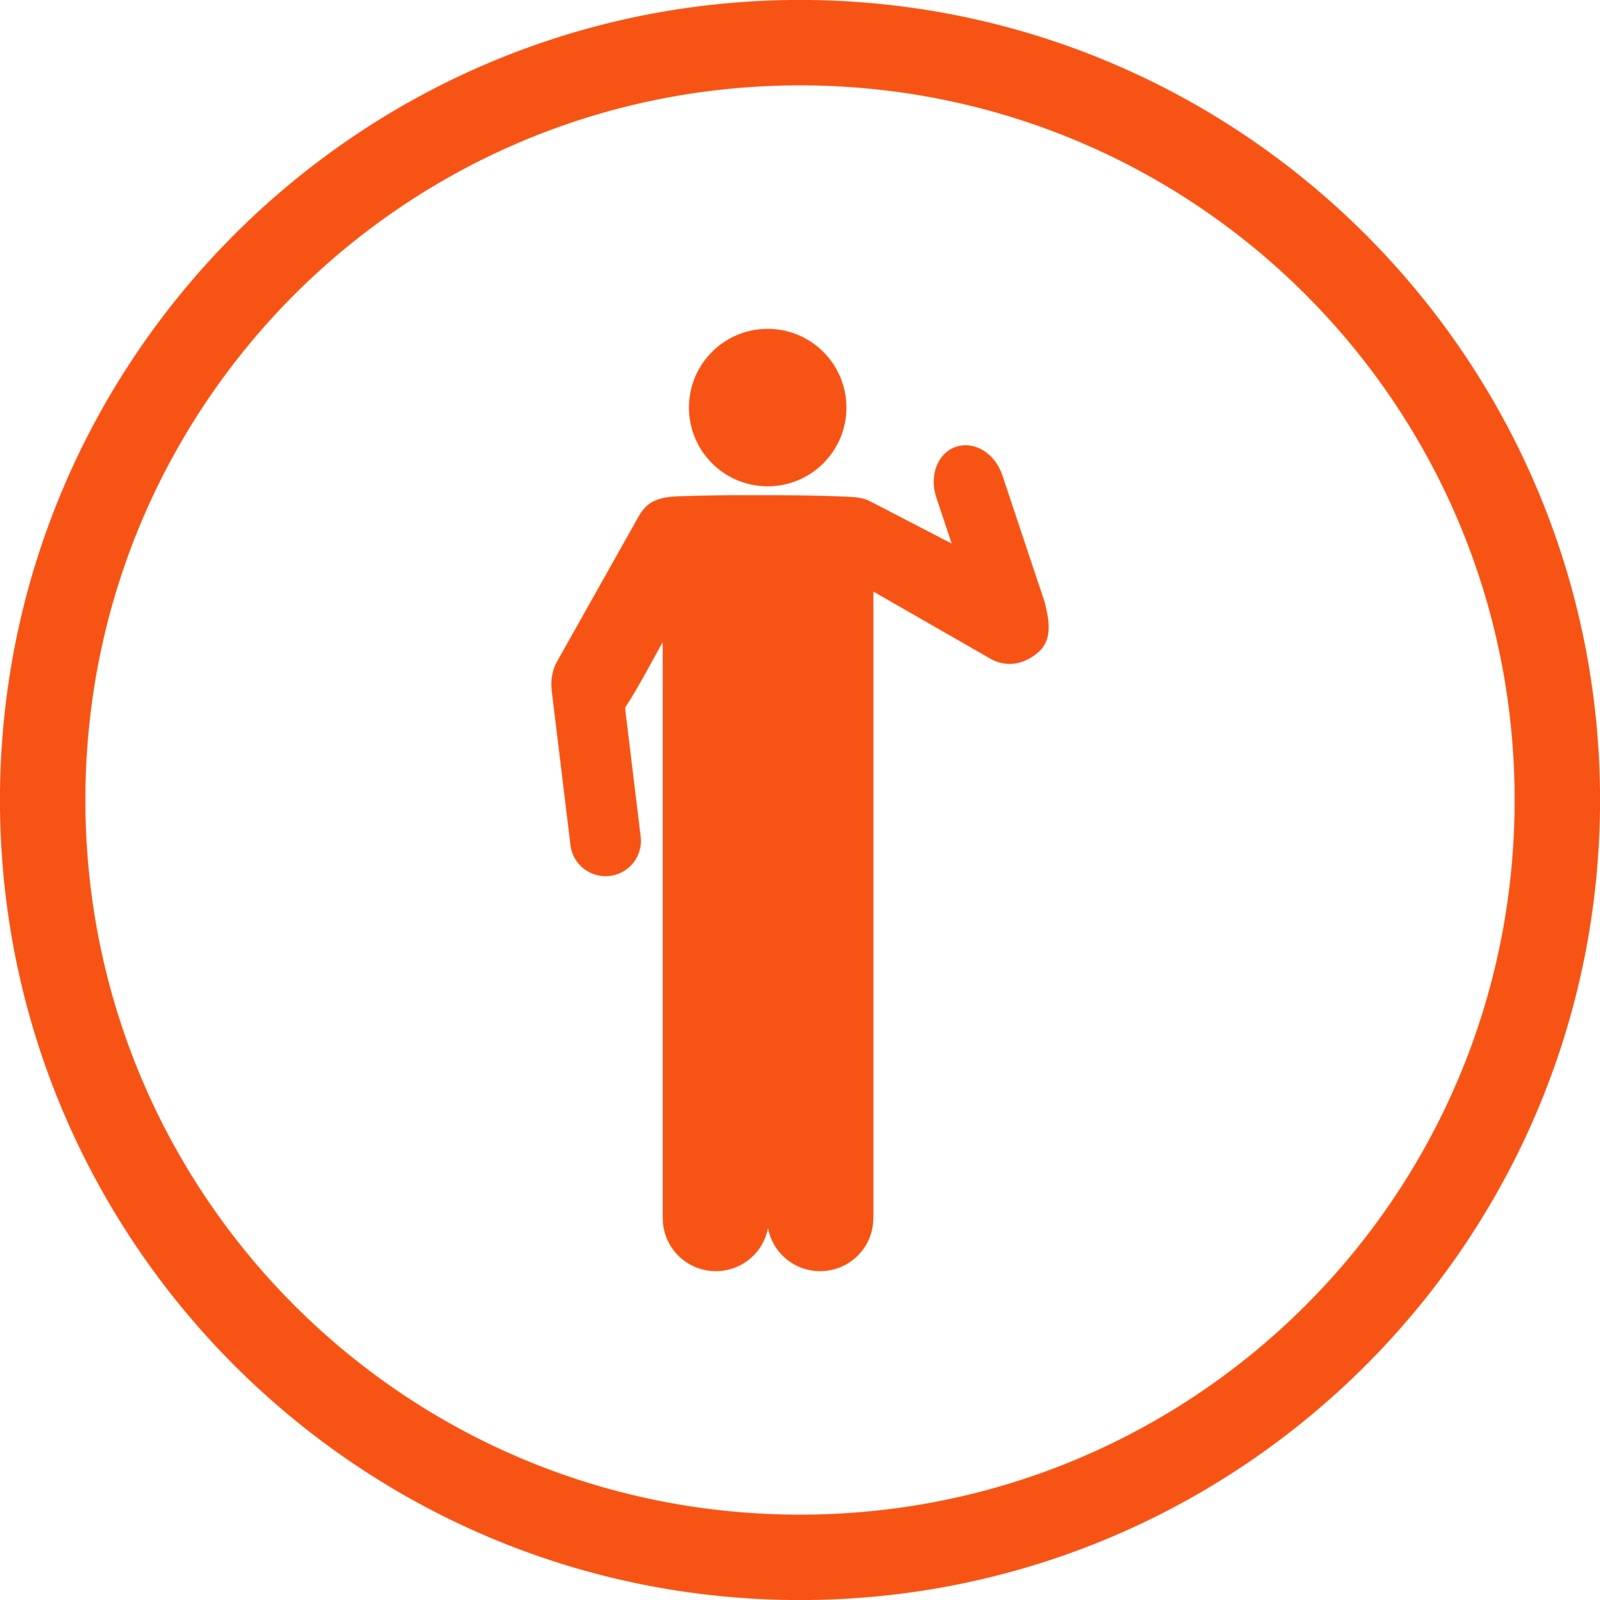 Opinion vector icon. This rounded flat symbol is drawn with orange color on a white background.